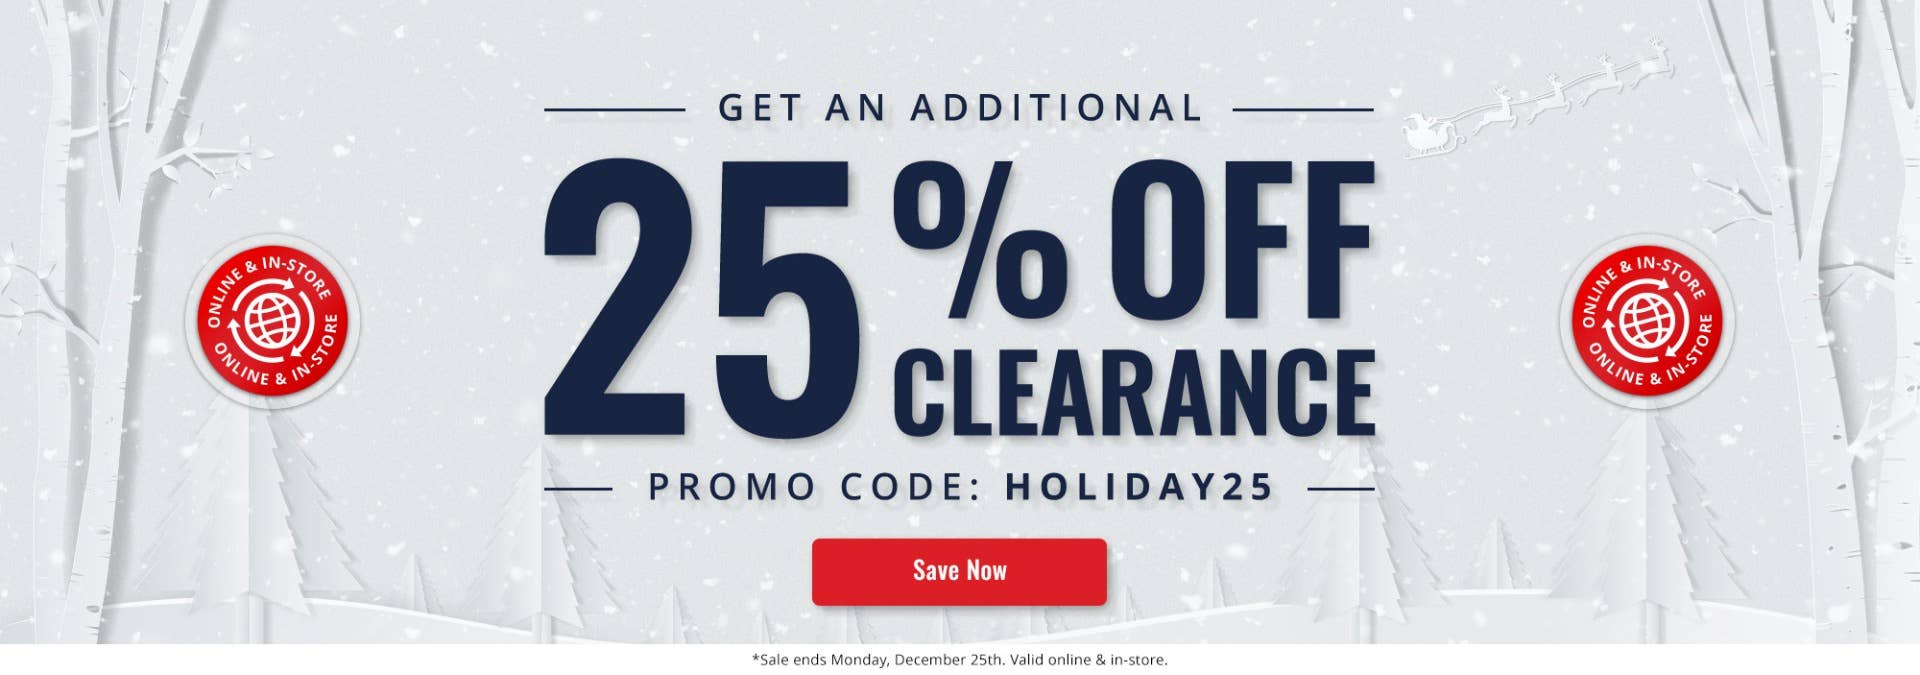 Holiday Savings: 25% Off Clearance